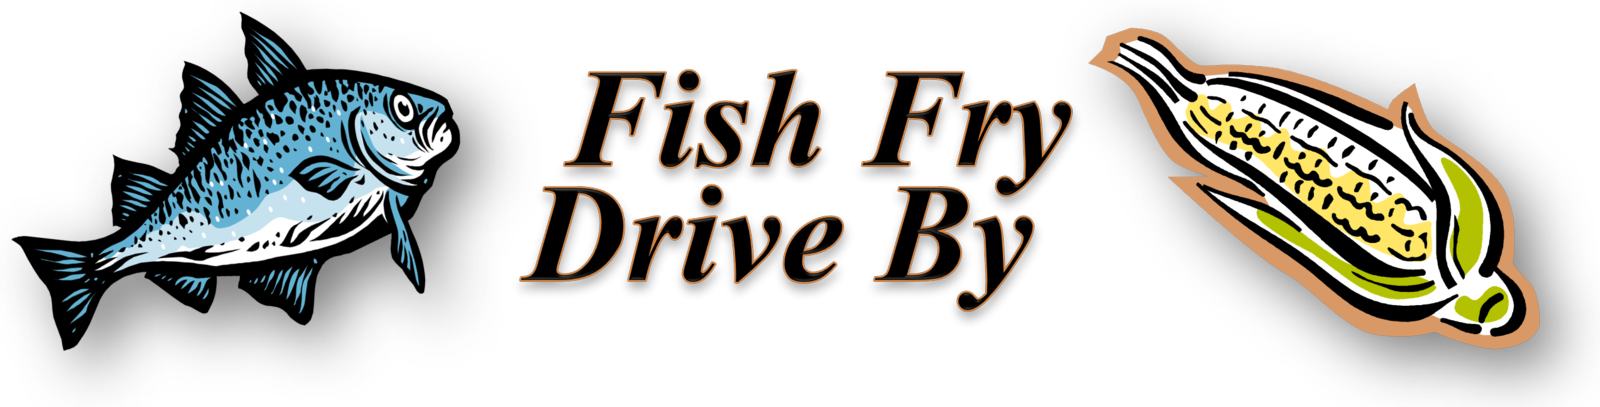 /online/TheHummData/Articles/202108/fish%20fry%20drive%20by.png